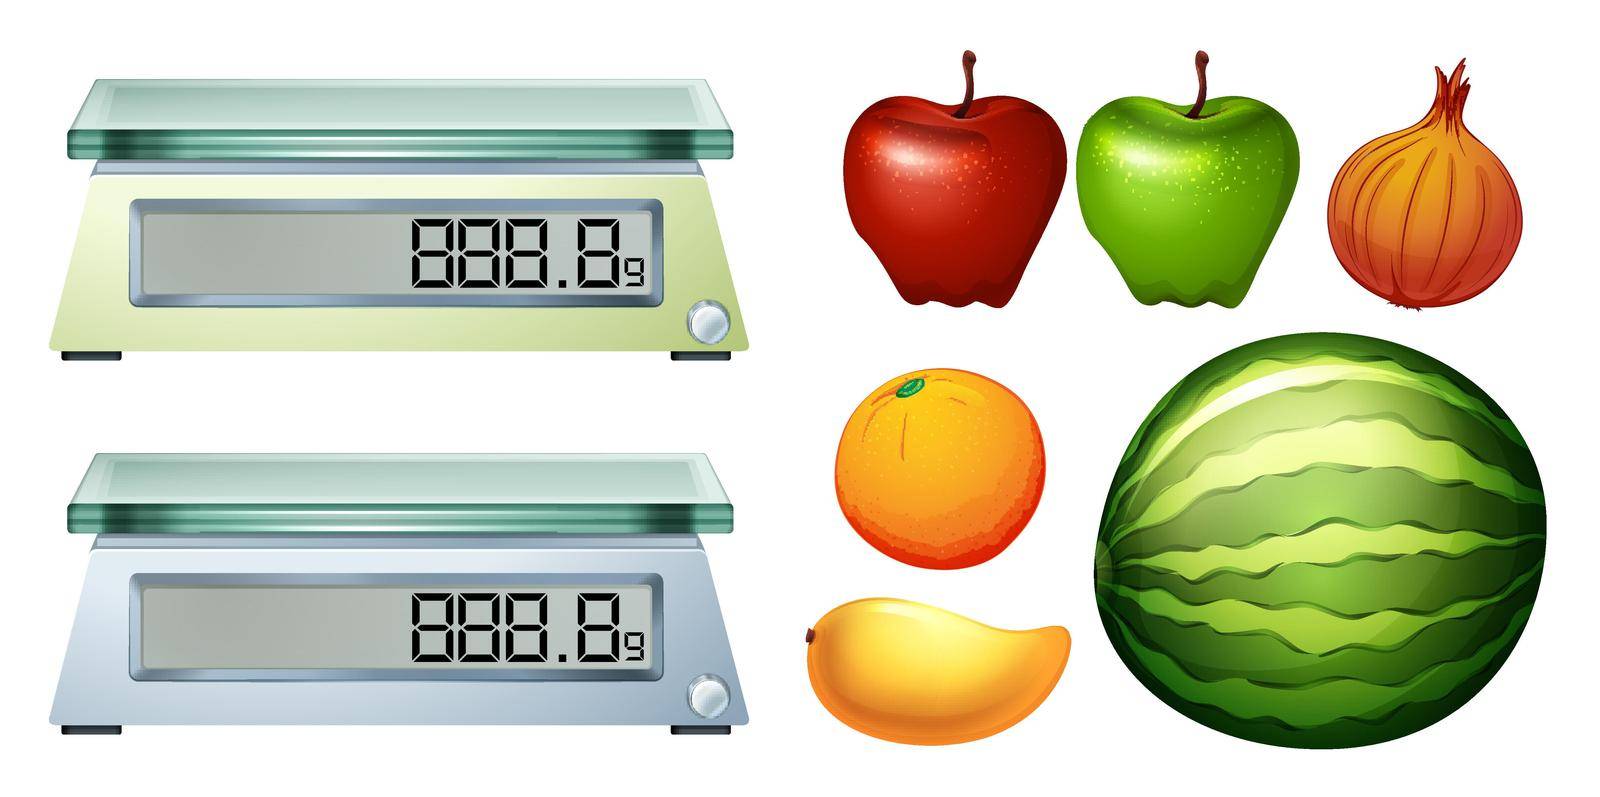 Measurement scales and fresh fruits illustration